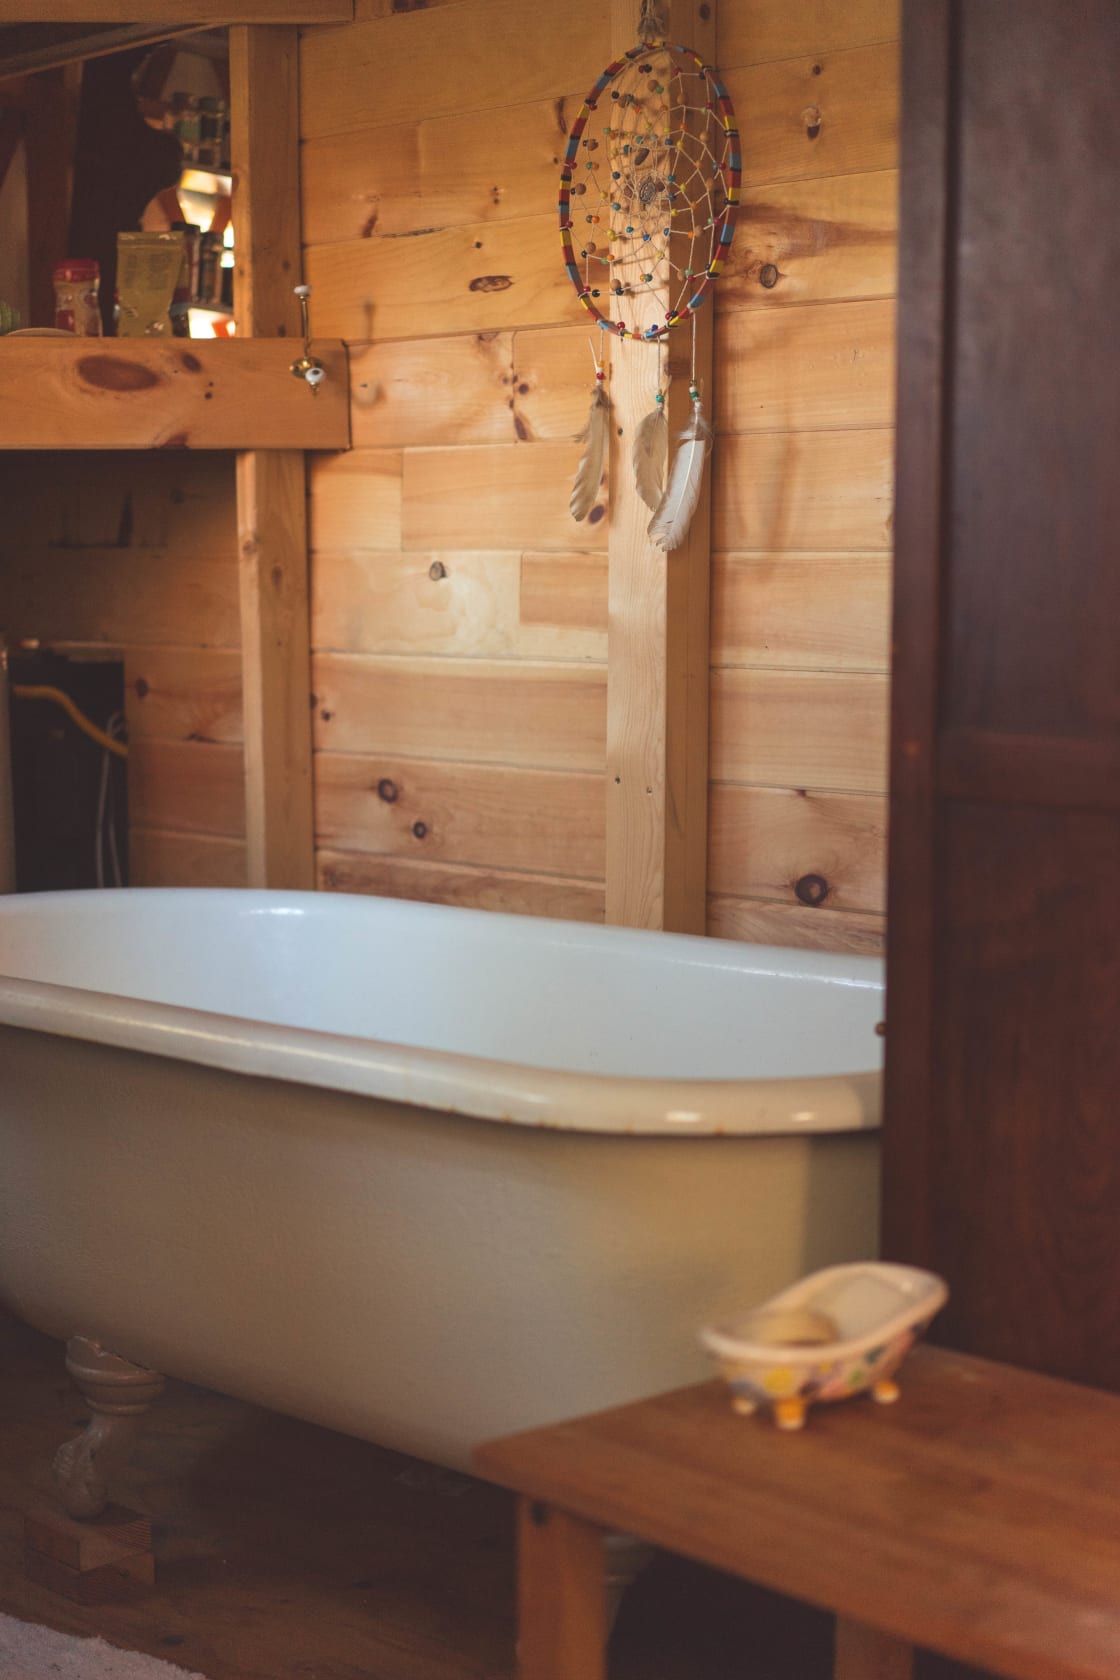 Yes, there is a bathtub, and it is amazing.